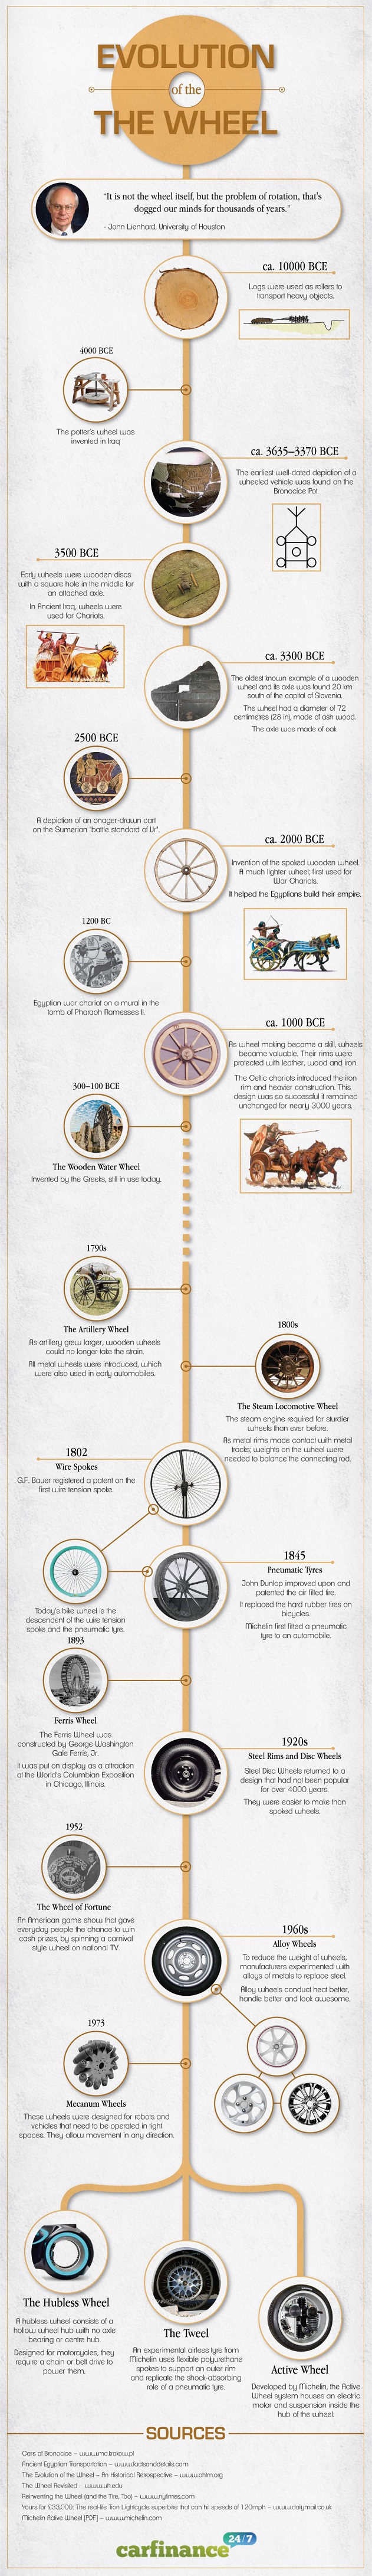 evolution of the wheel resize1 The Evolution of the Wheel [Infographic]